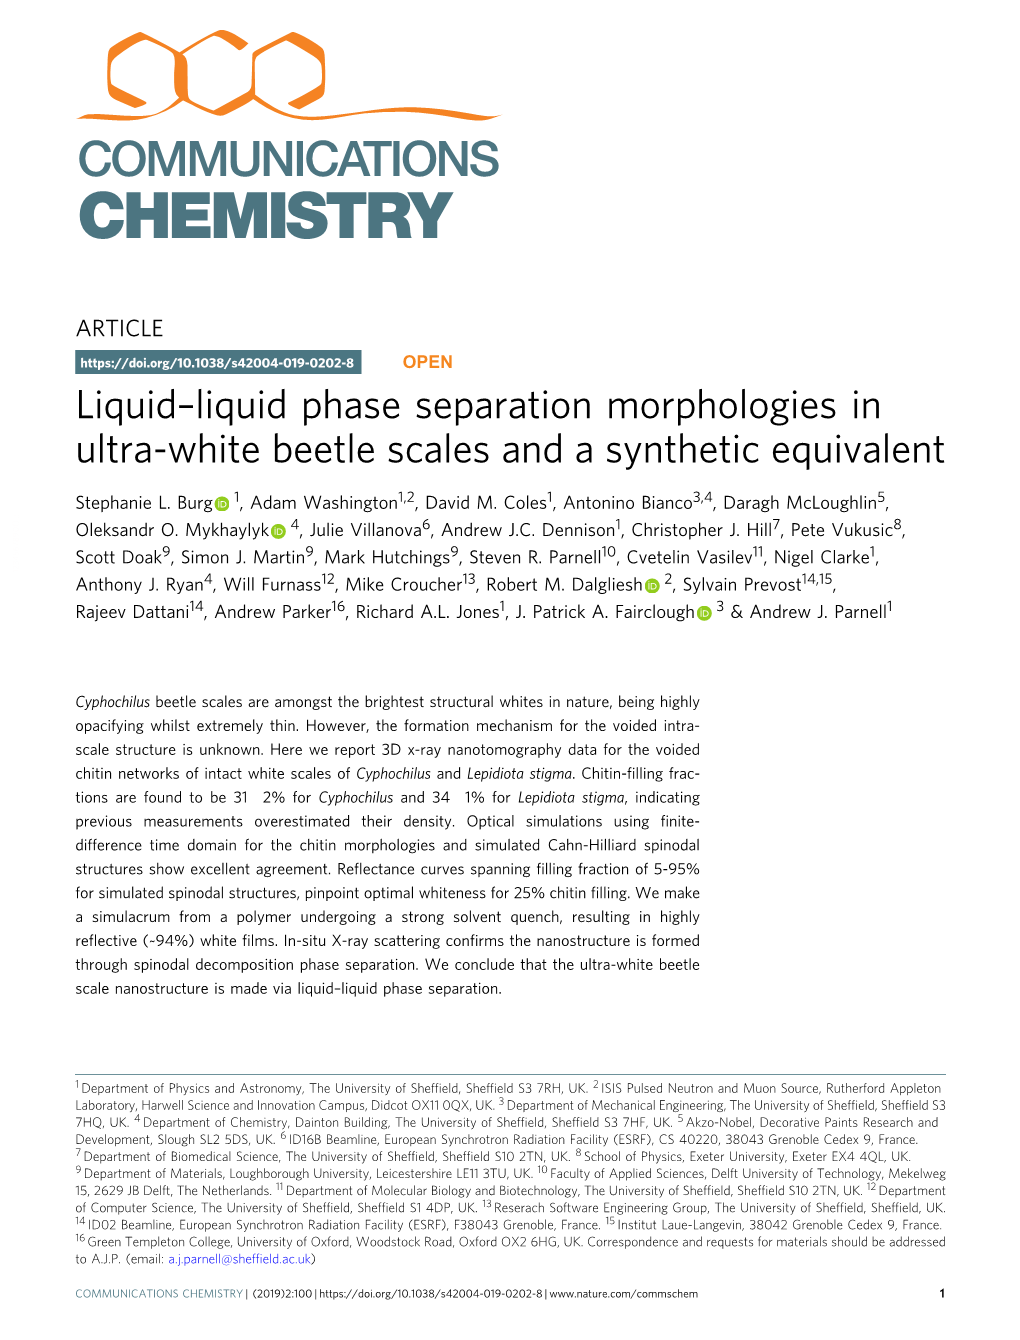 Liquid Phase Separation Morphologies in Ultra-White Beetle Scales and a Synthetic Equivalent